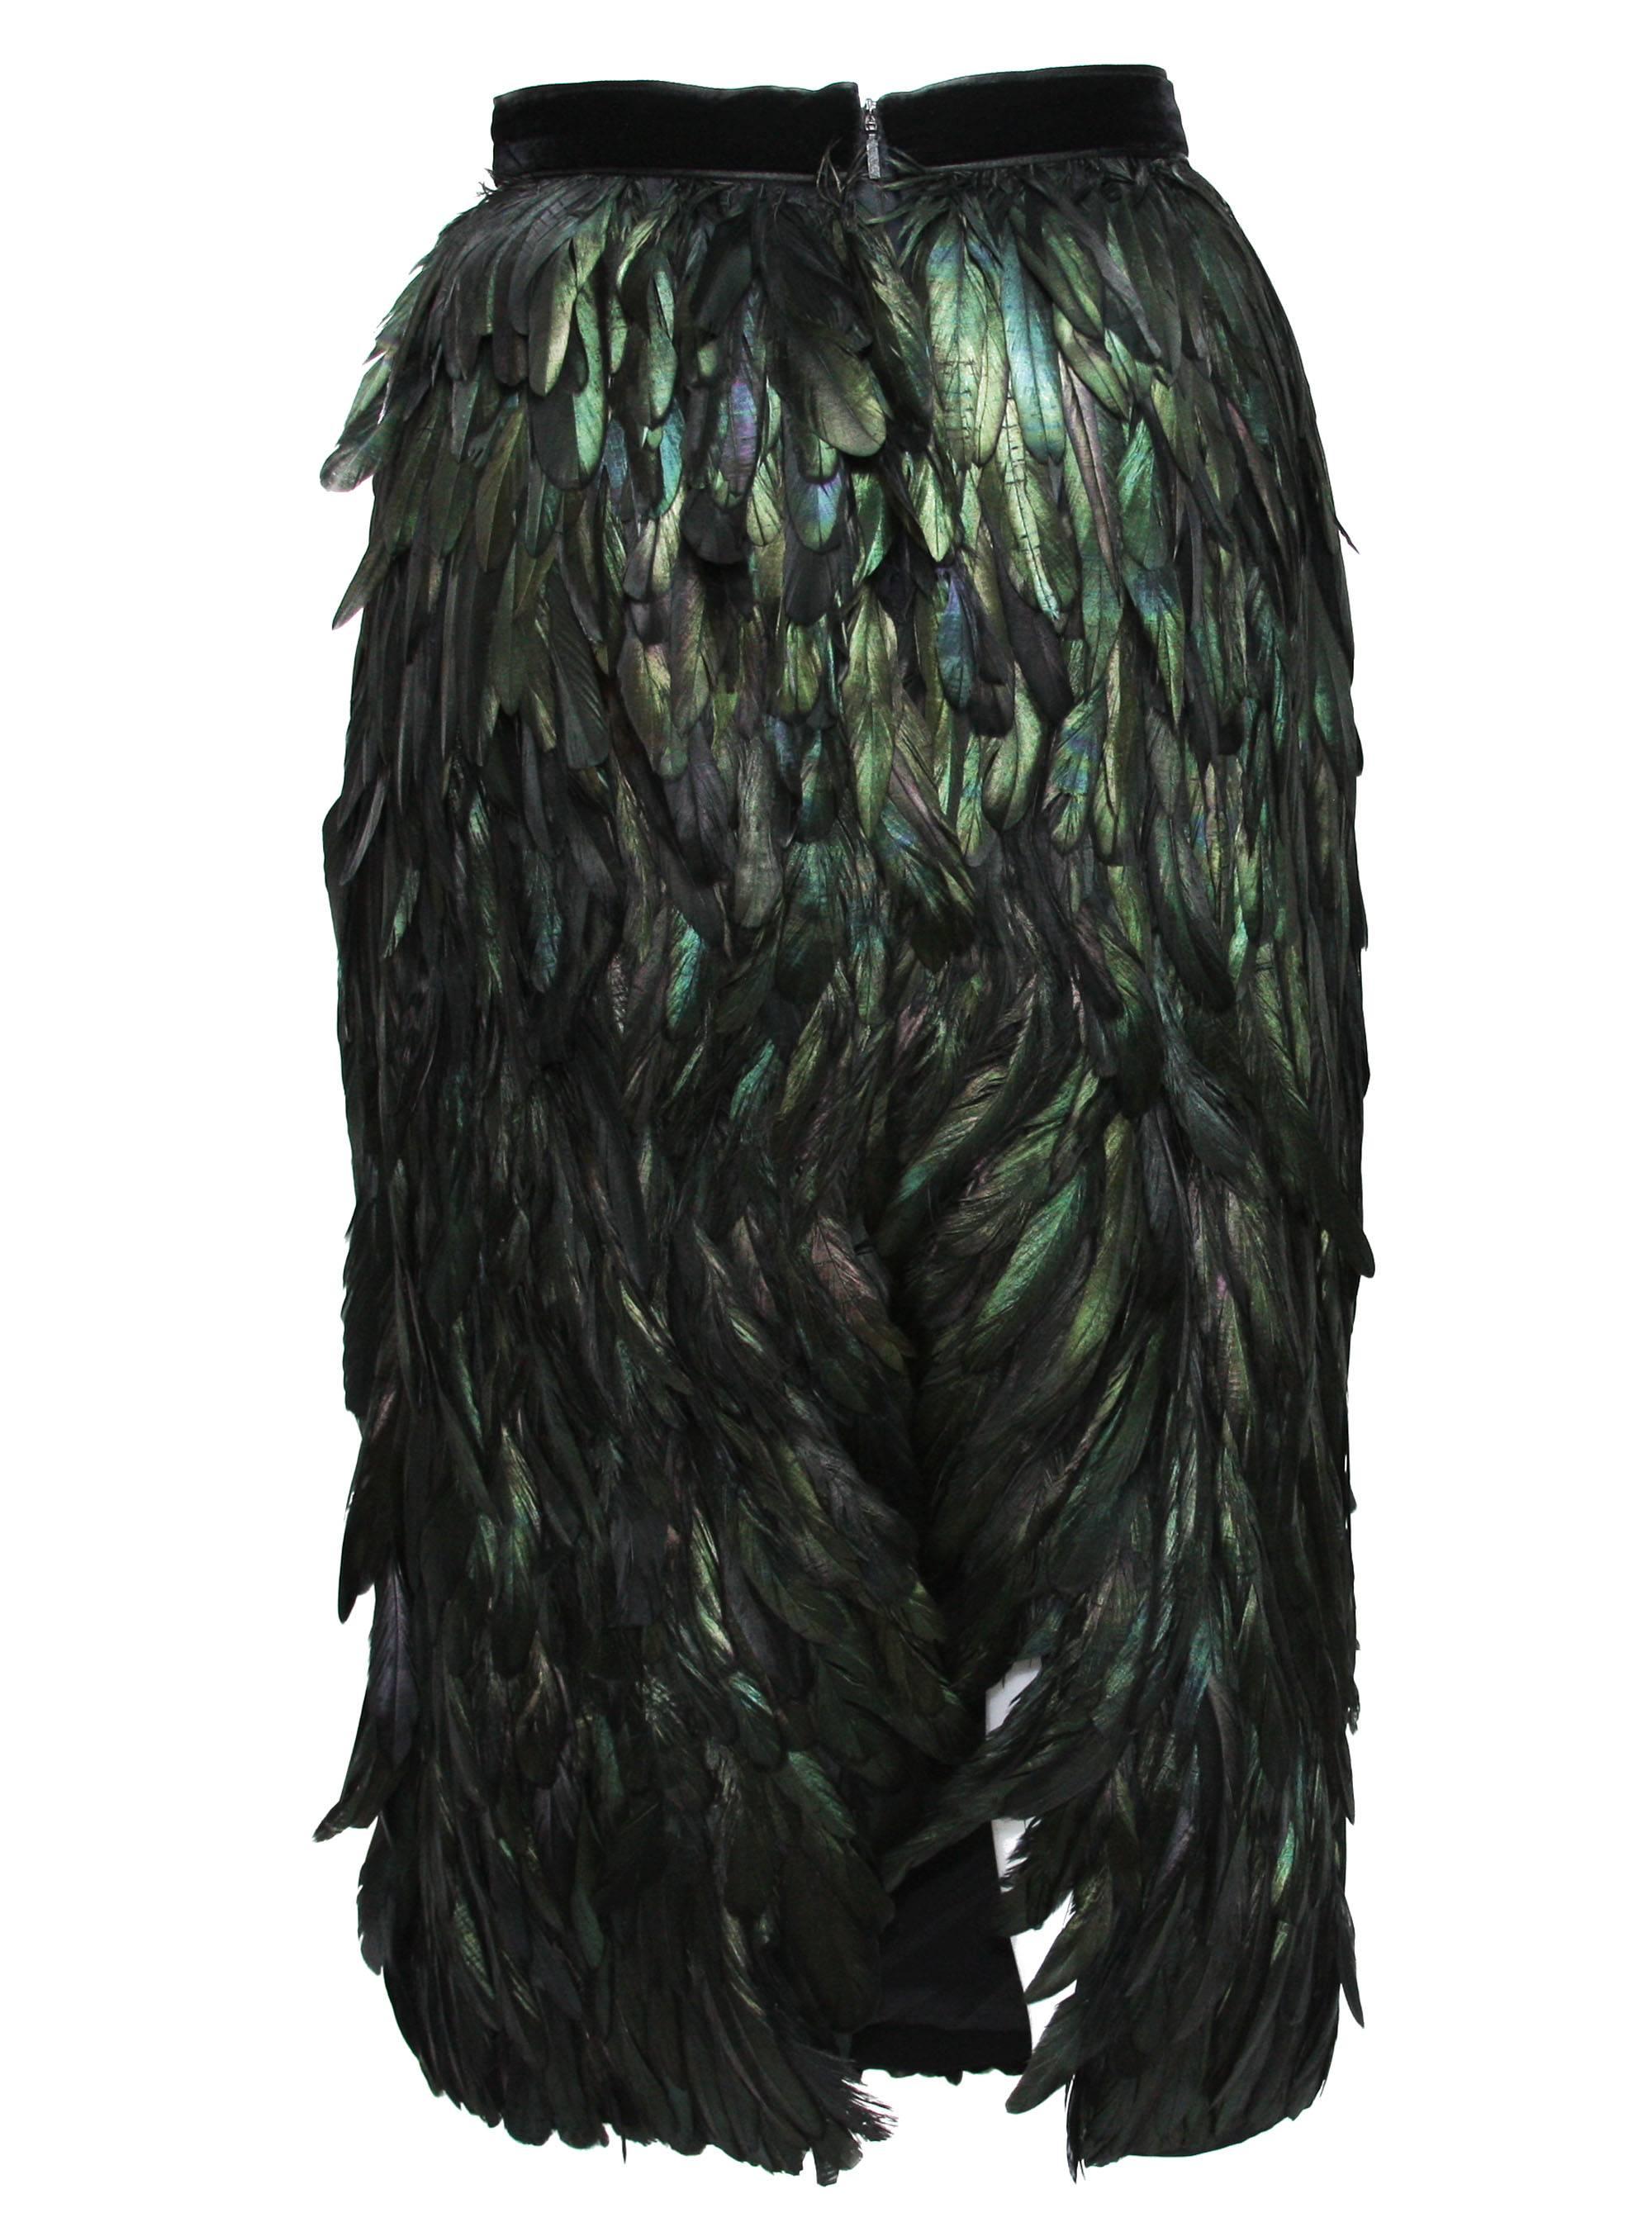 Gucci Runway Silk Long Feather Skirt
Italian Size 40 - US 4
Color - Tropical Paradise Green
Black Velvet Waist Band
Single Vent & Zipper at Back
Fully Lined
Waist - 26 inches, Length - 28 inches
Made in Italy
Excellent Condition.
